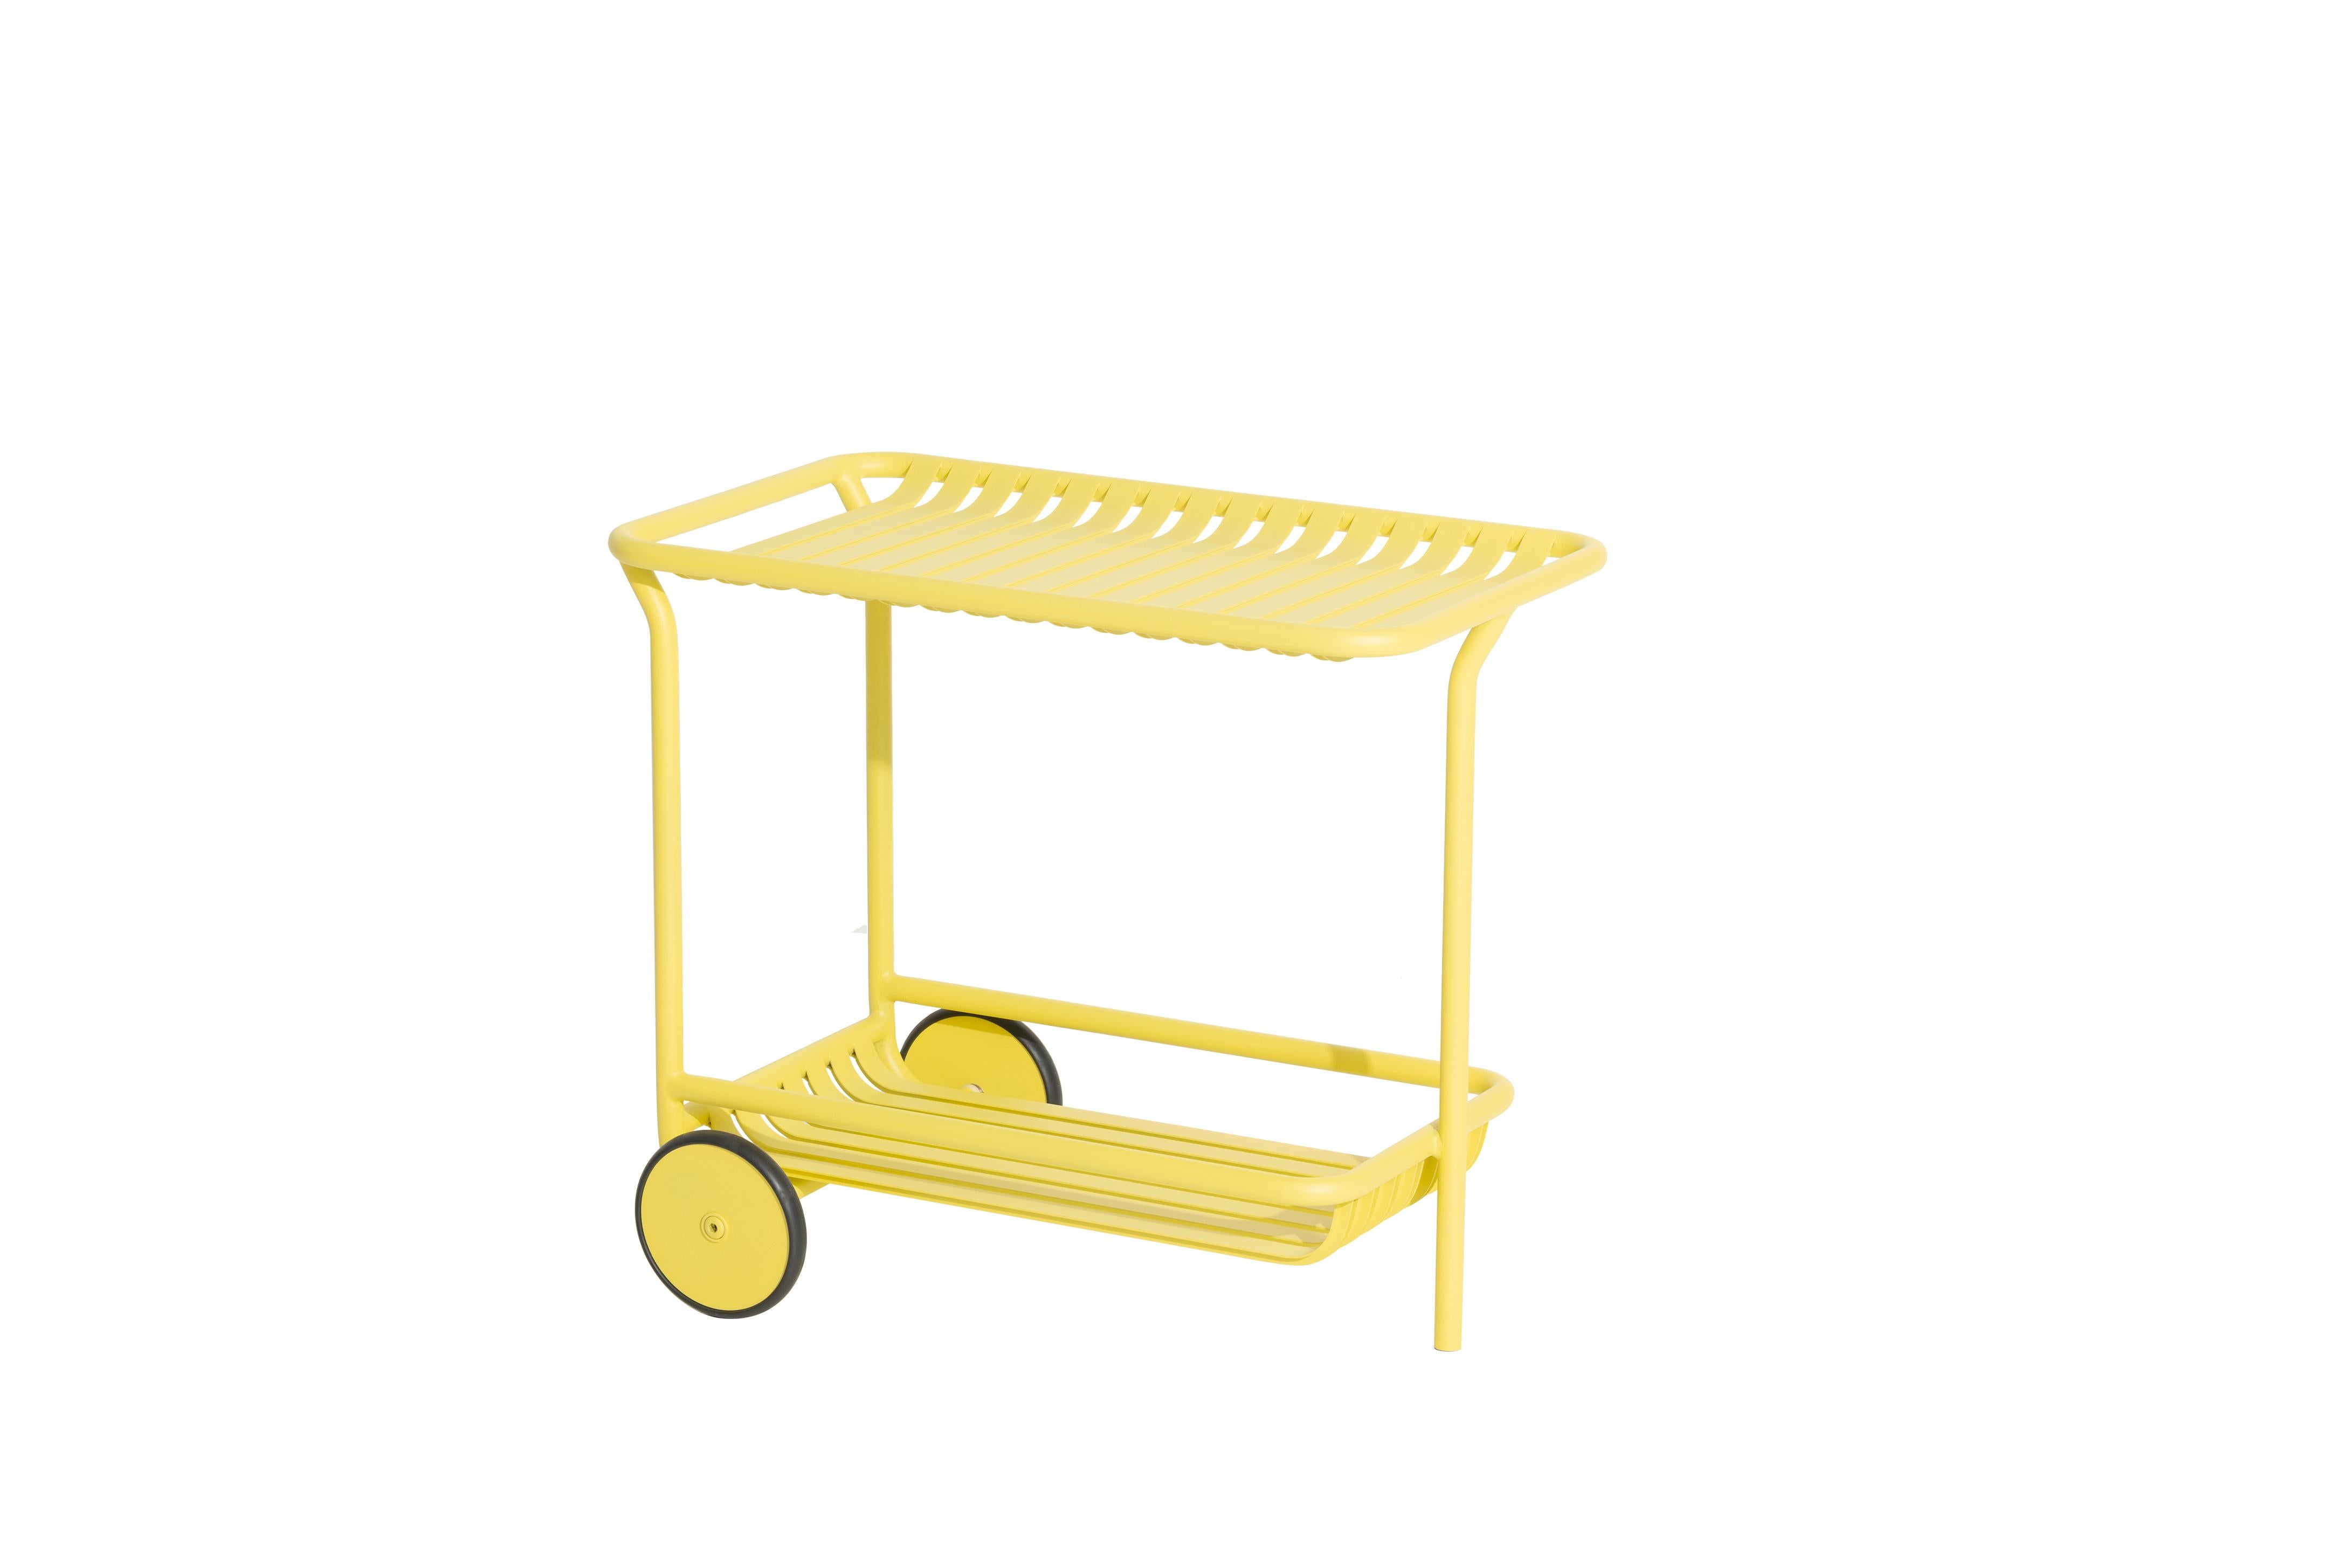 Petite Friture Week-End Trolley in Yellow Aluminium by Studio BrichetZiegler, 2017

The week-end collection is a full range of outdoor furniture, in aluminium grained epoxy paint, matt finish, that includes 18 functions and 8 colours for the